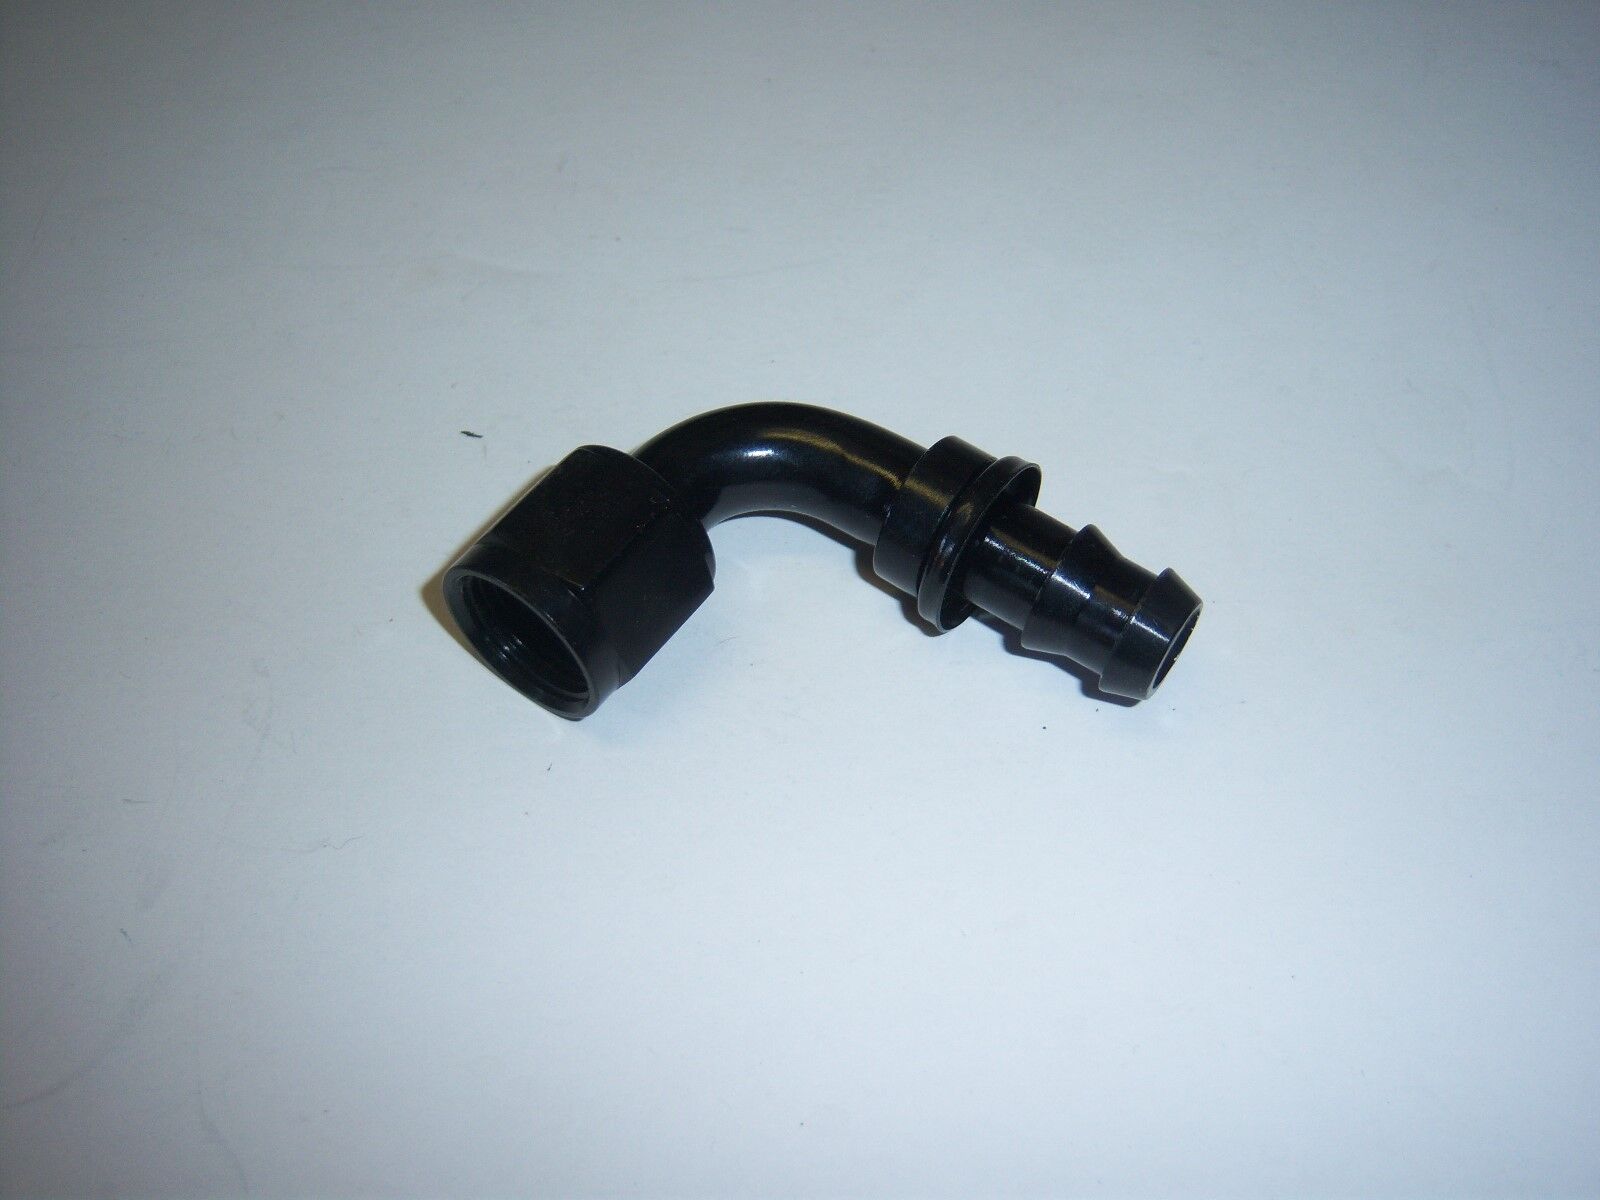 10AN FEMALE SWIVEL TO 5/8 HOSE BARB FUEL ADAPTER 90 DEGREE BLACK